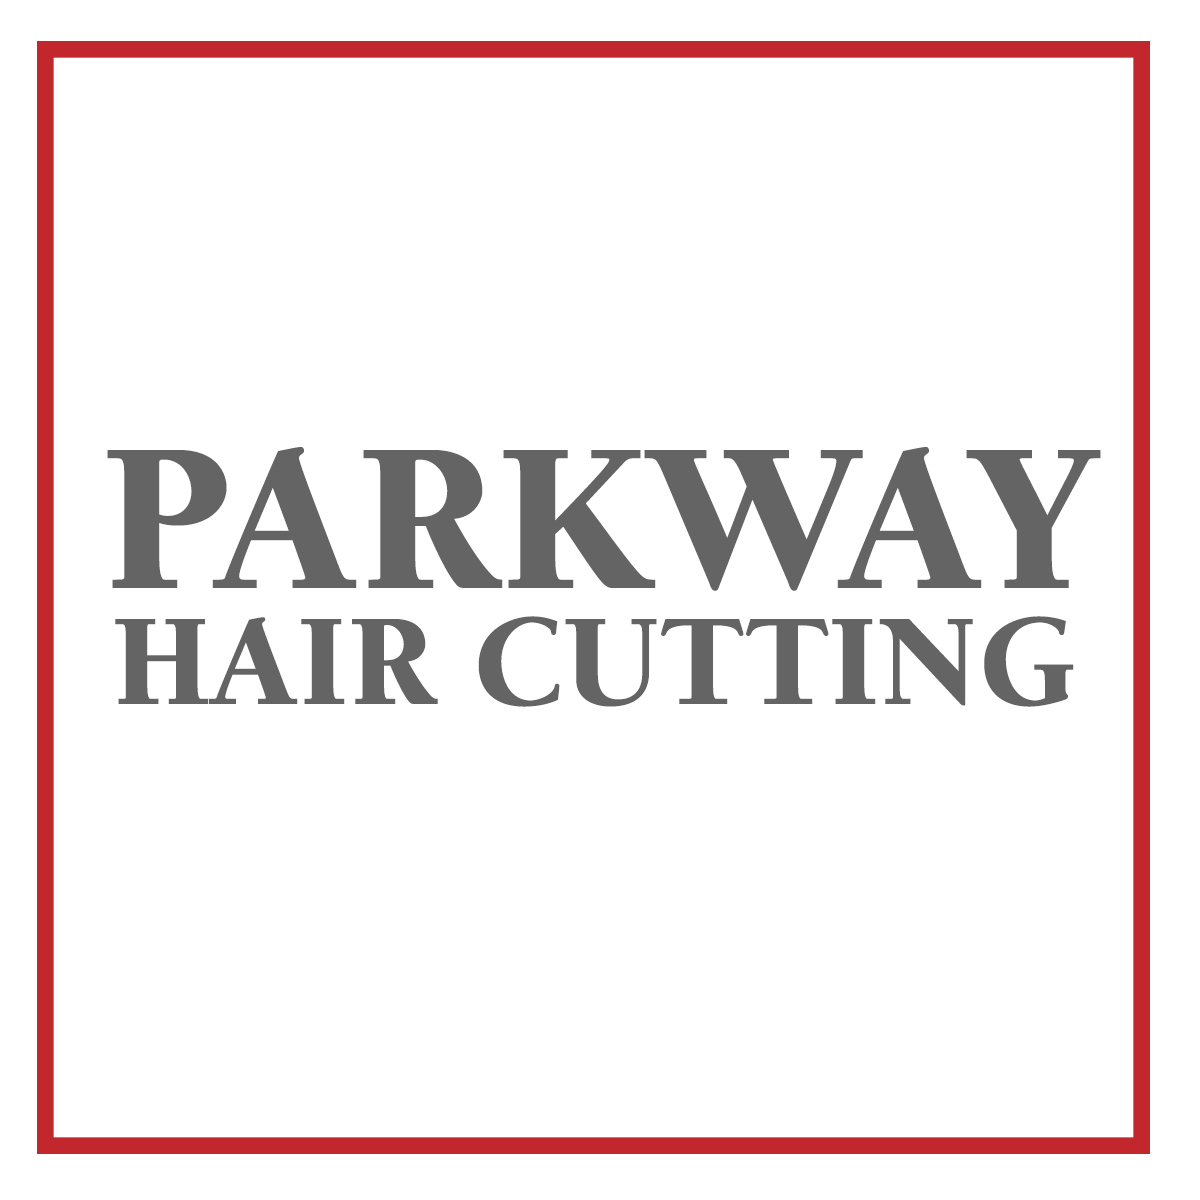 You are currently viewing Parkway Hair Cutting